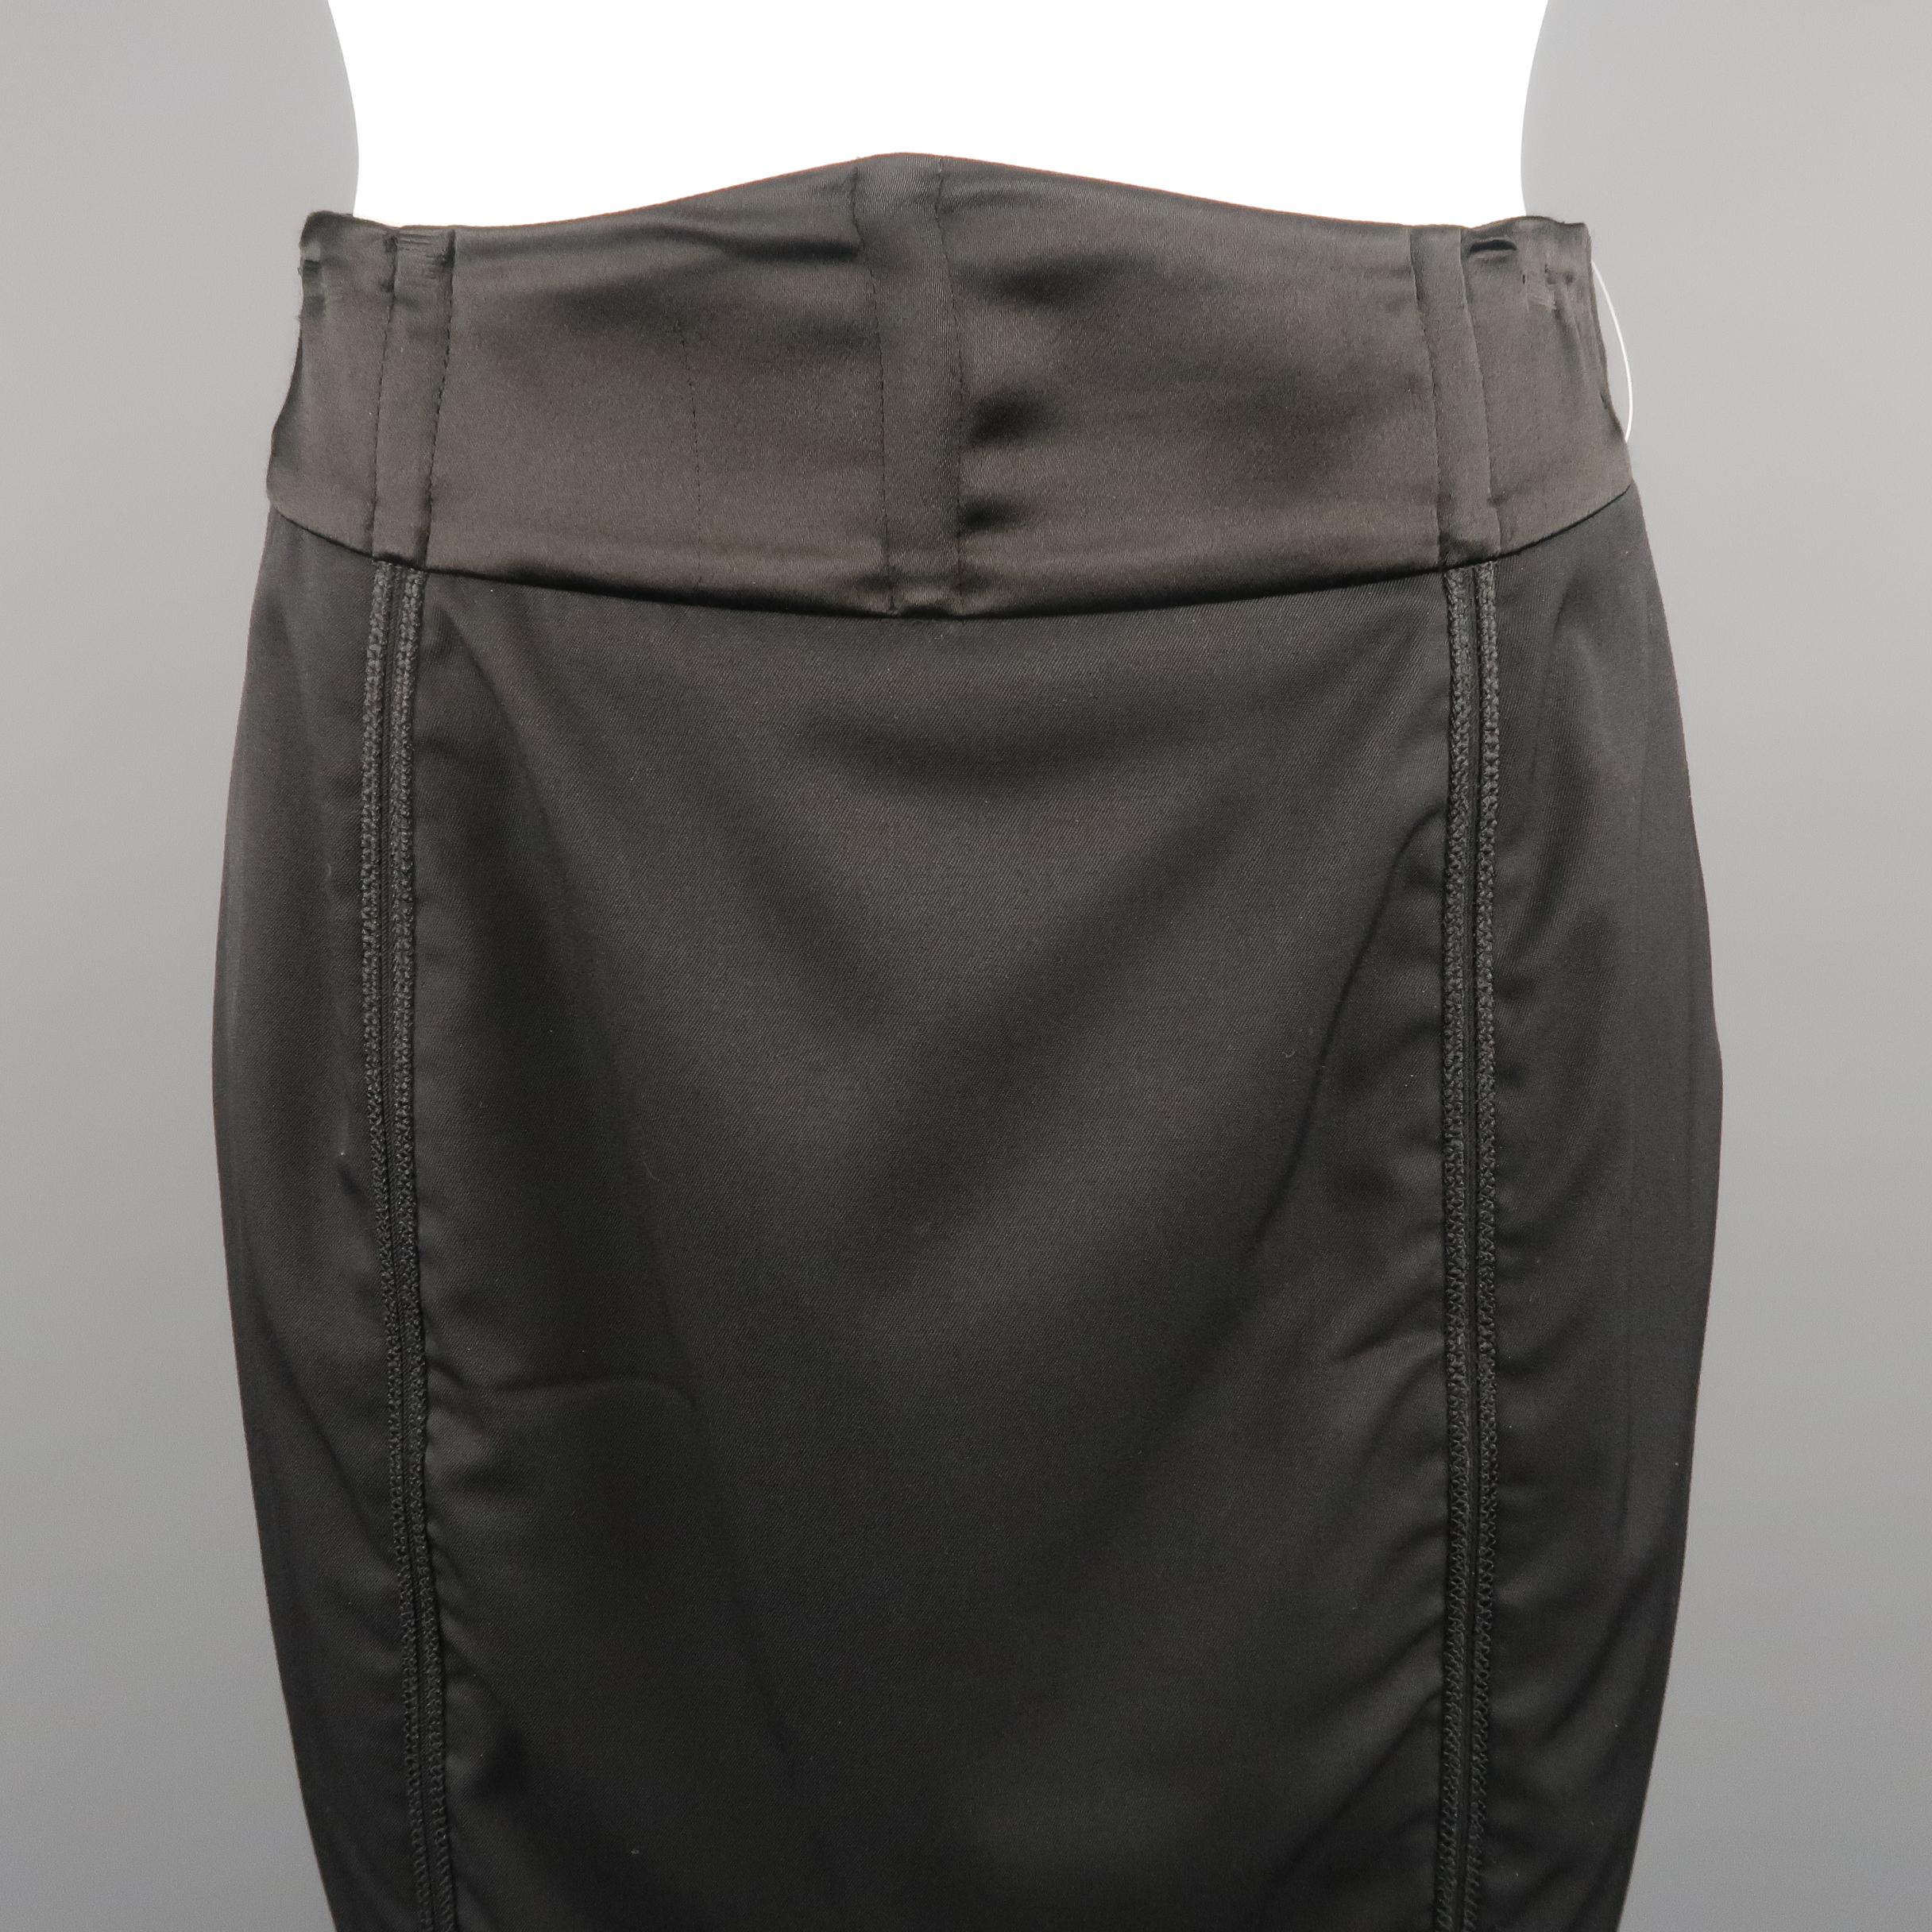 STELLA McCARTNEY pencil skirt, come in black tone and wool blend, with trim details on top, double asymmetrical zipper and satin waistband. Presenting some peeling close to the zipper. Made in Italy.
 
Excellent Pre-Owned Condition.
Marked: 42 IT
